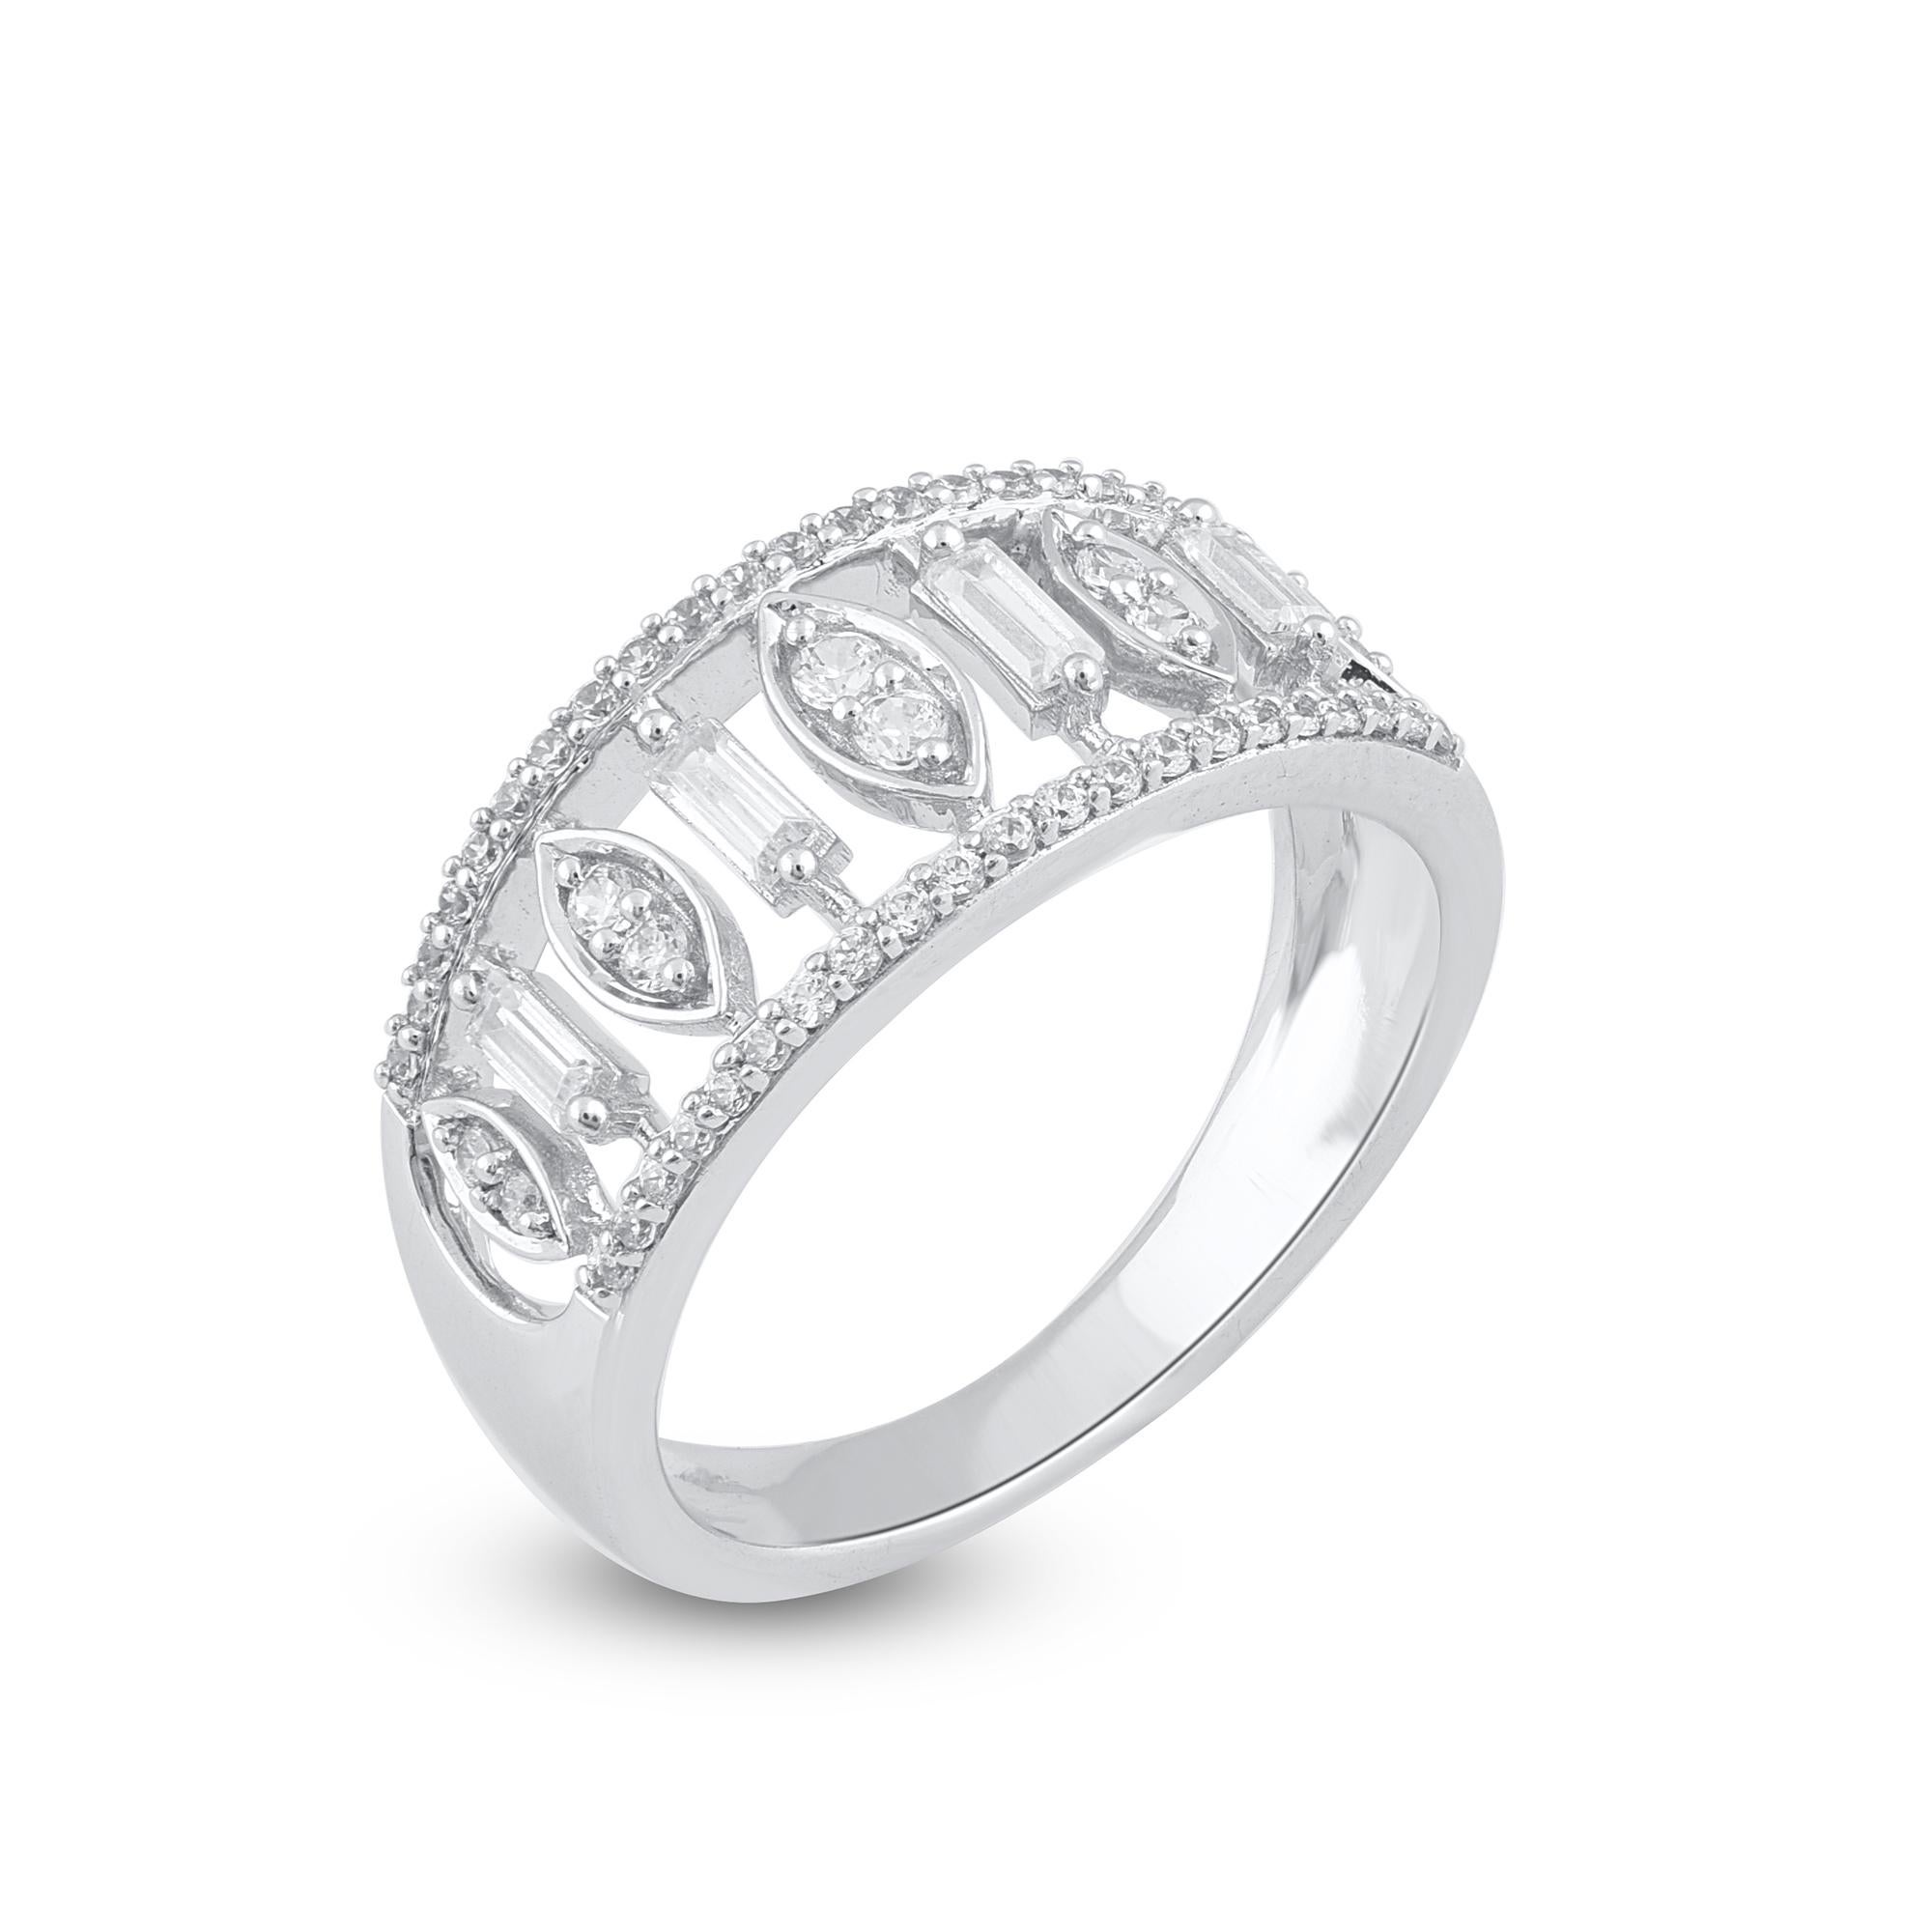 Bring charm to your look with this diamond ring. The ring is crafted from 14-karat gold in your choice of white, rose, or yellow, and features Round Brilliant 52 and Baguette - 4 white diamonds Prong set, H-I color I2 clarity and a high polish